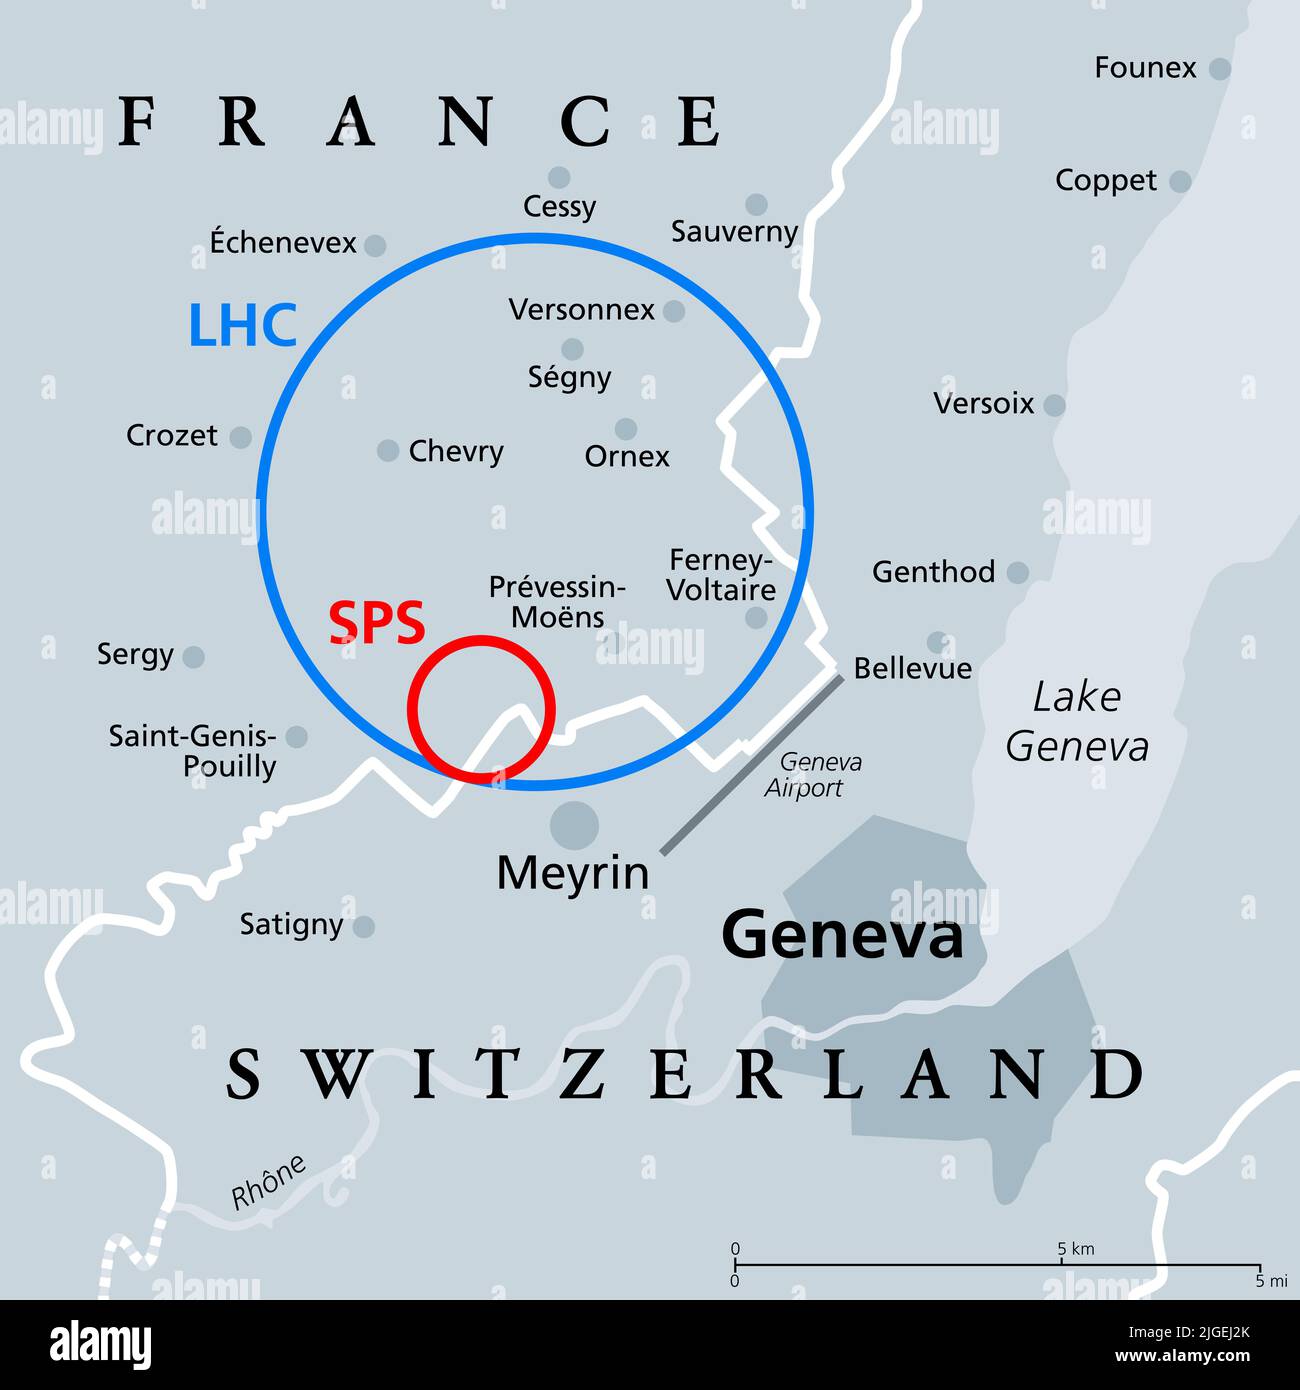 Large Hadron Collider (LHC) and Super Proton Synchrotron (SPS), gray political map. Position of worlds largest and highest-energy particle collider. Stock Photo